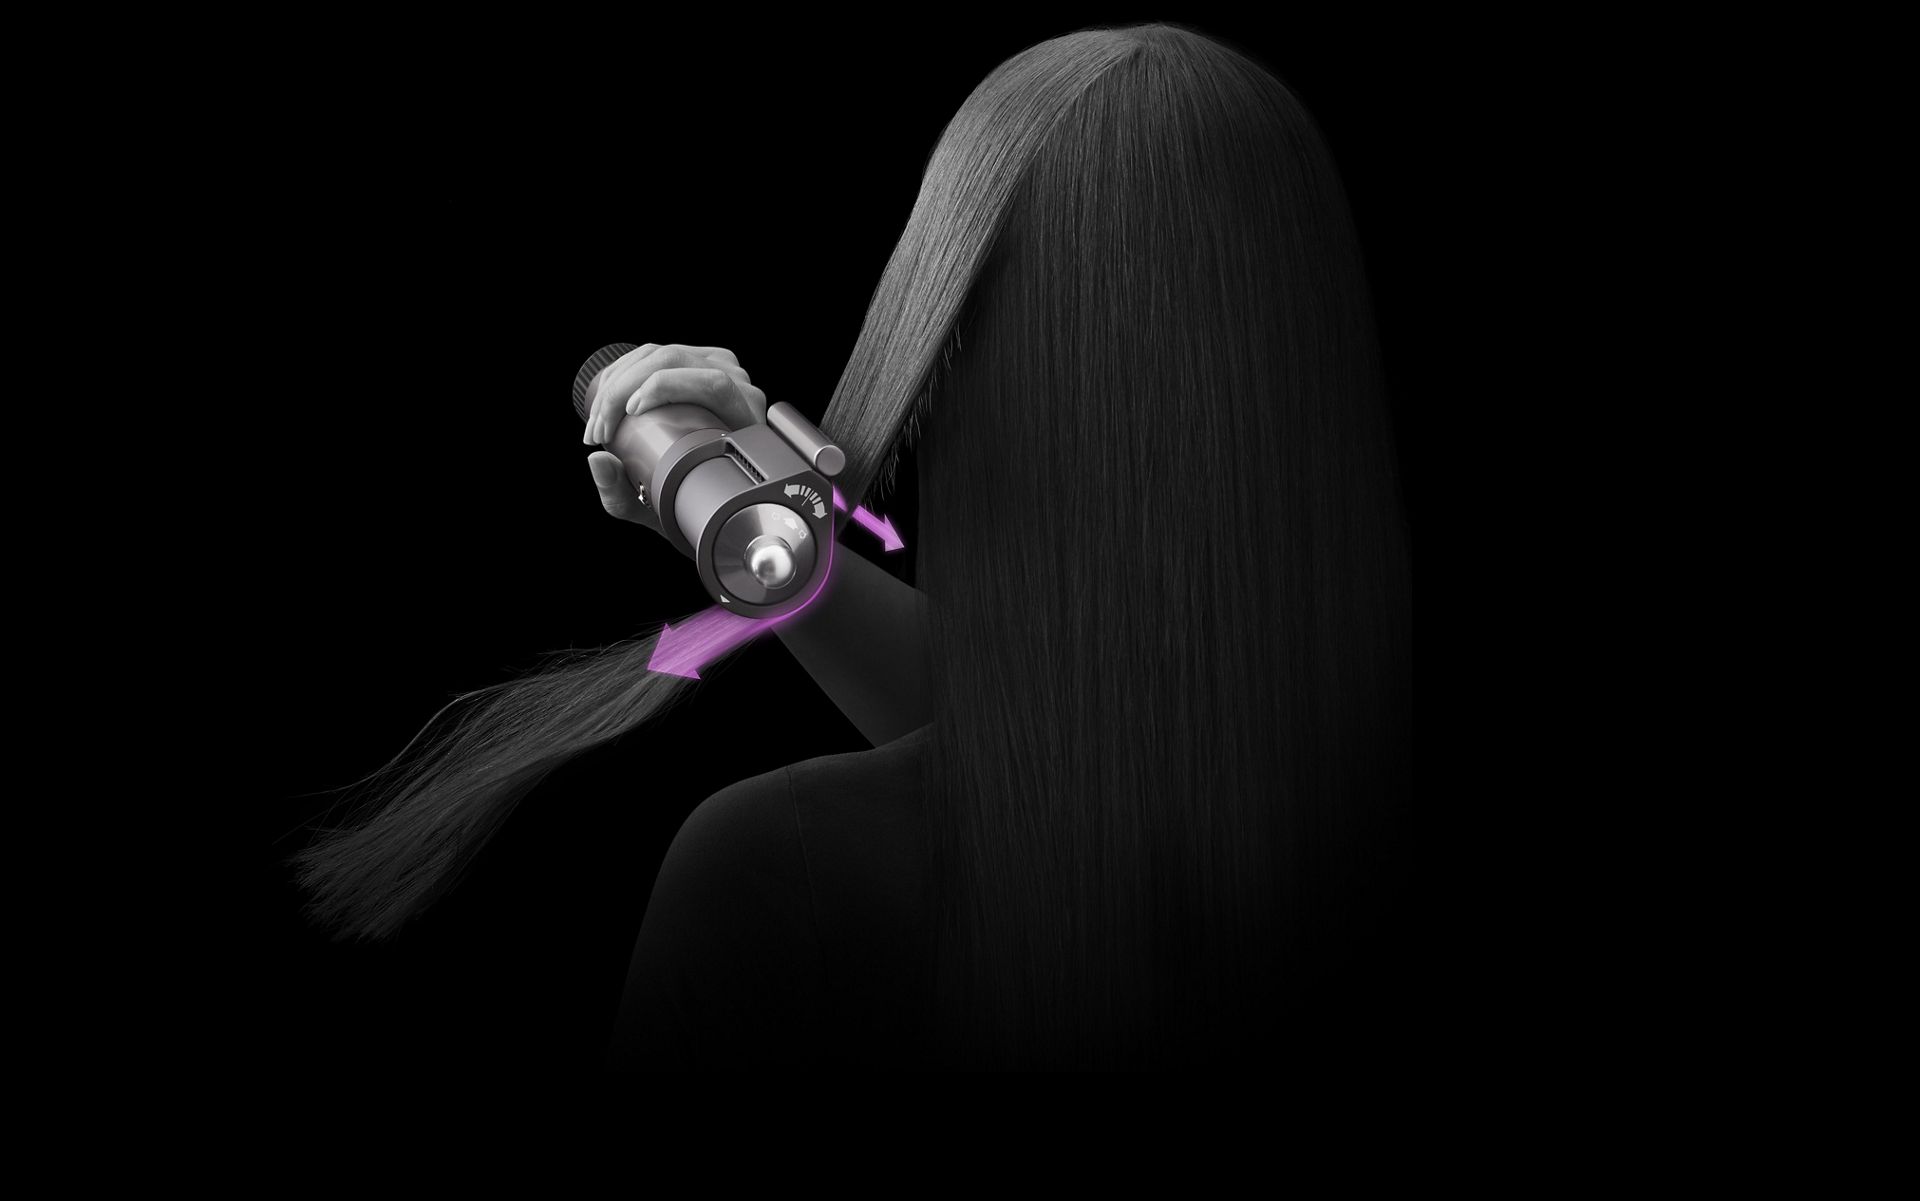 Model using Coanda smoothing dryer attachment in smoothing mode